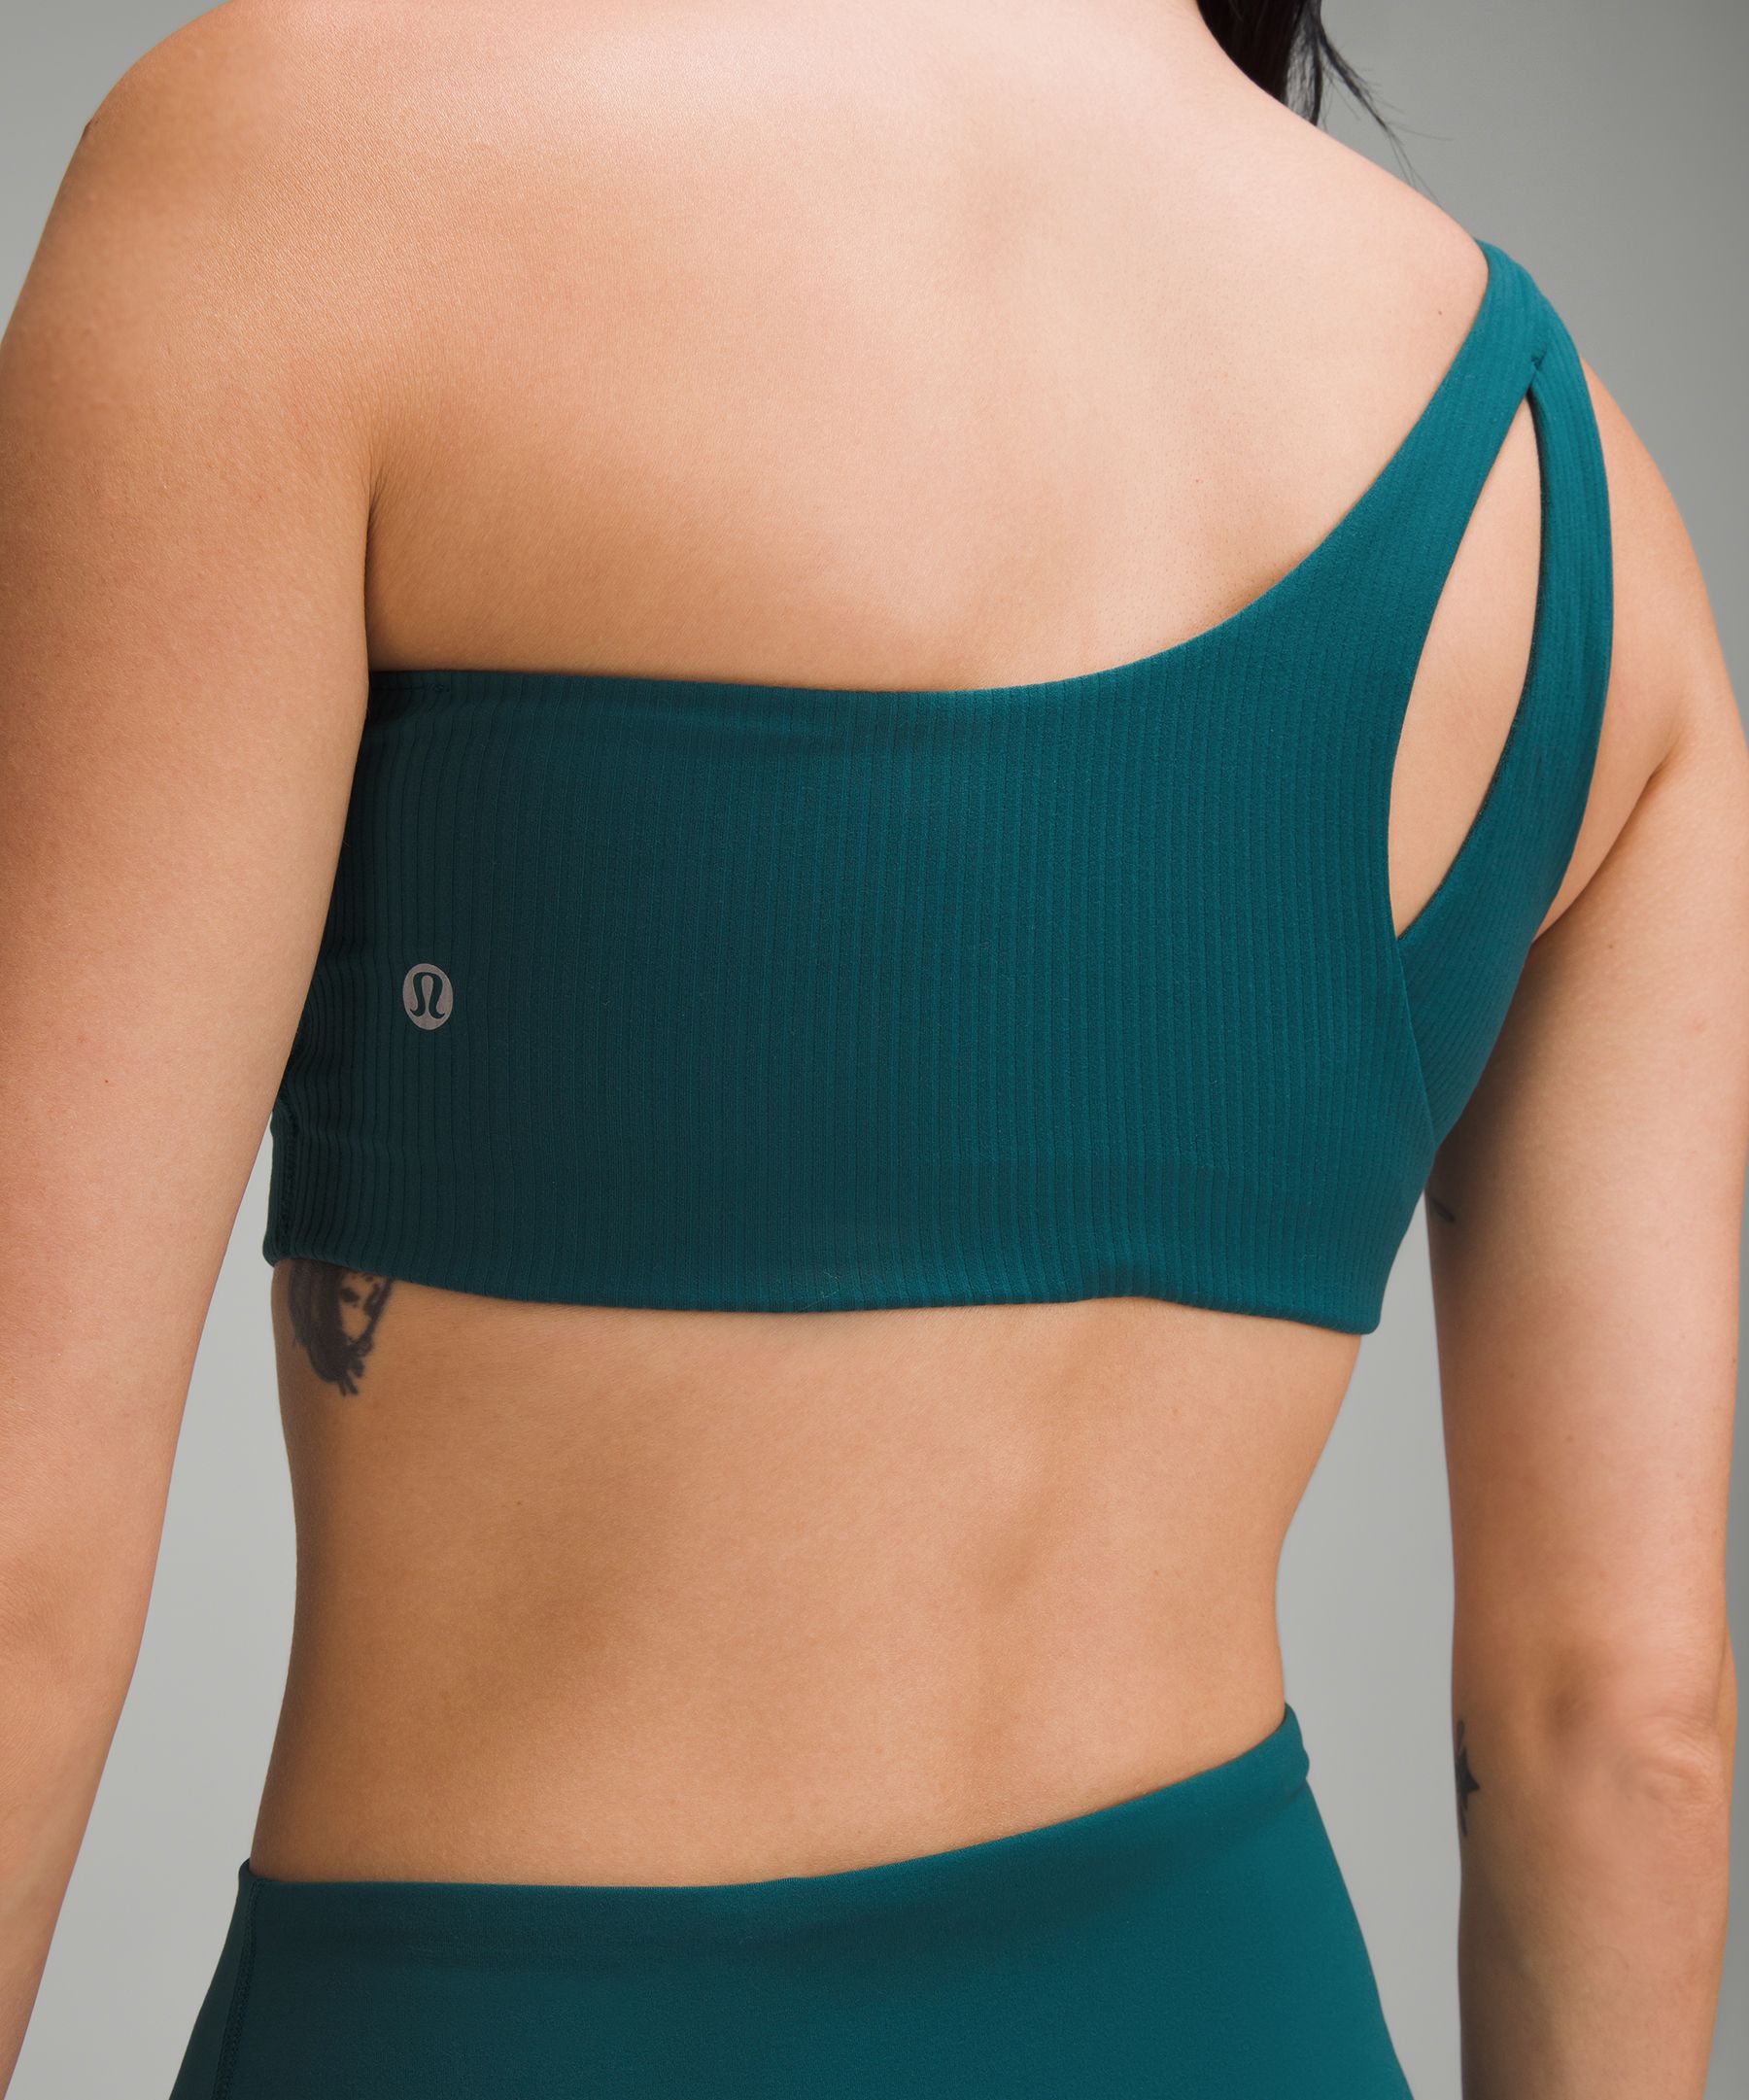 This @lululemon Ribbed Nulu Asymmetrical Yoga Bra is a MUST have